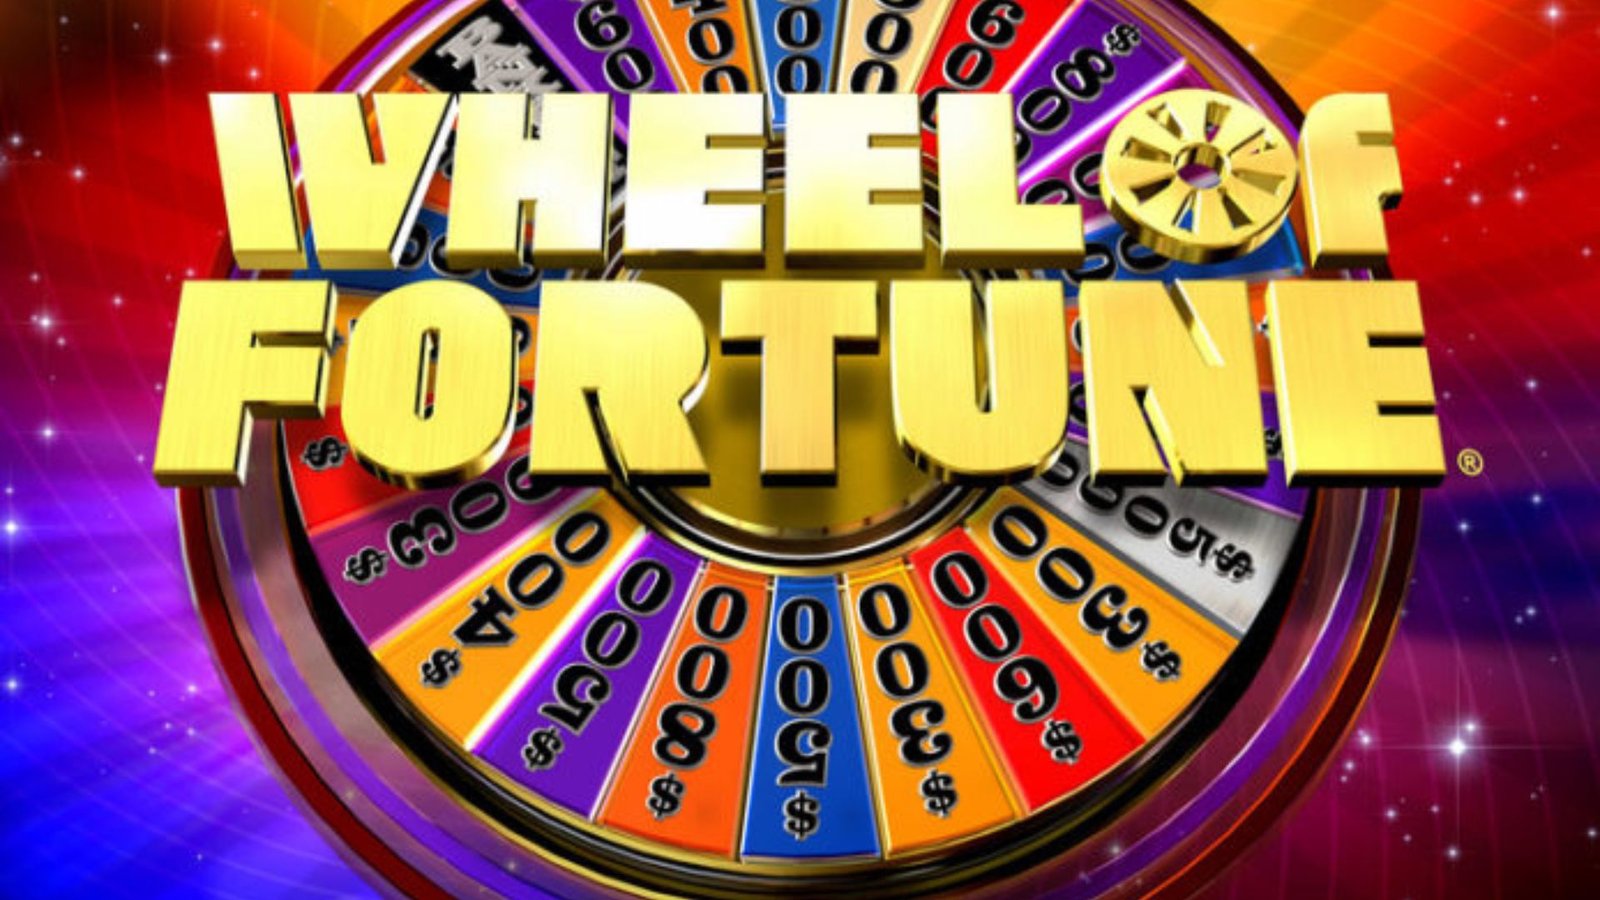 Wheel of Fortune-One of the Online Slots with Bonus Wheels